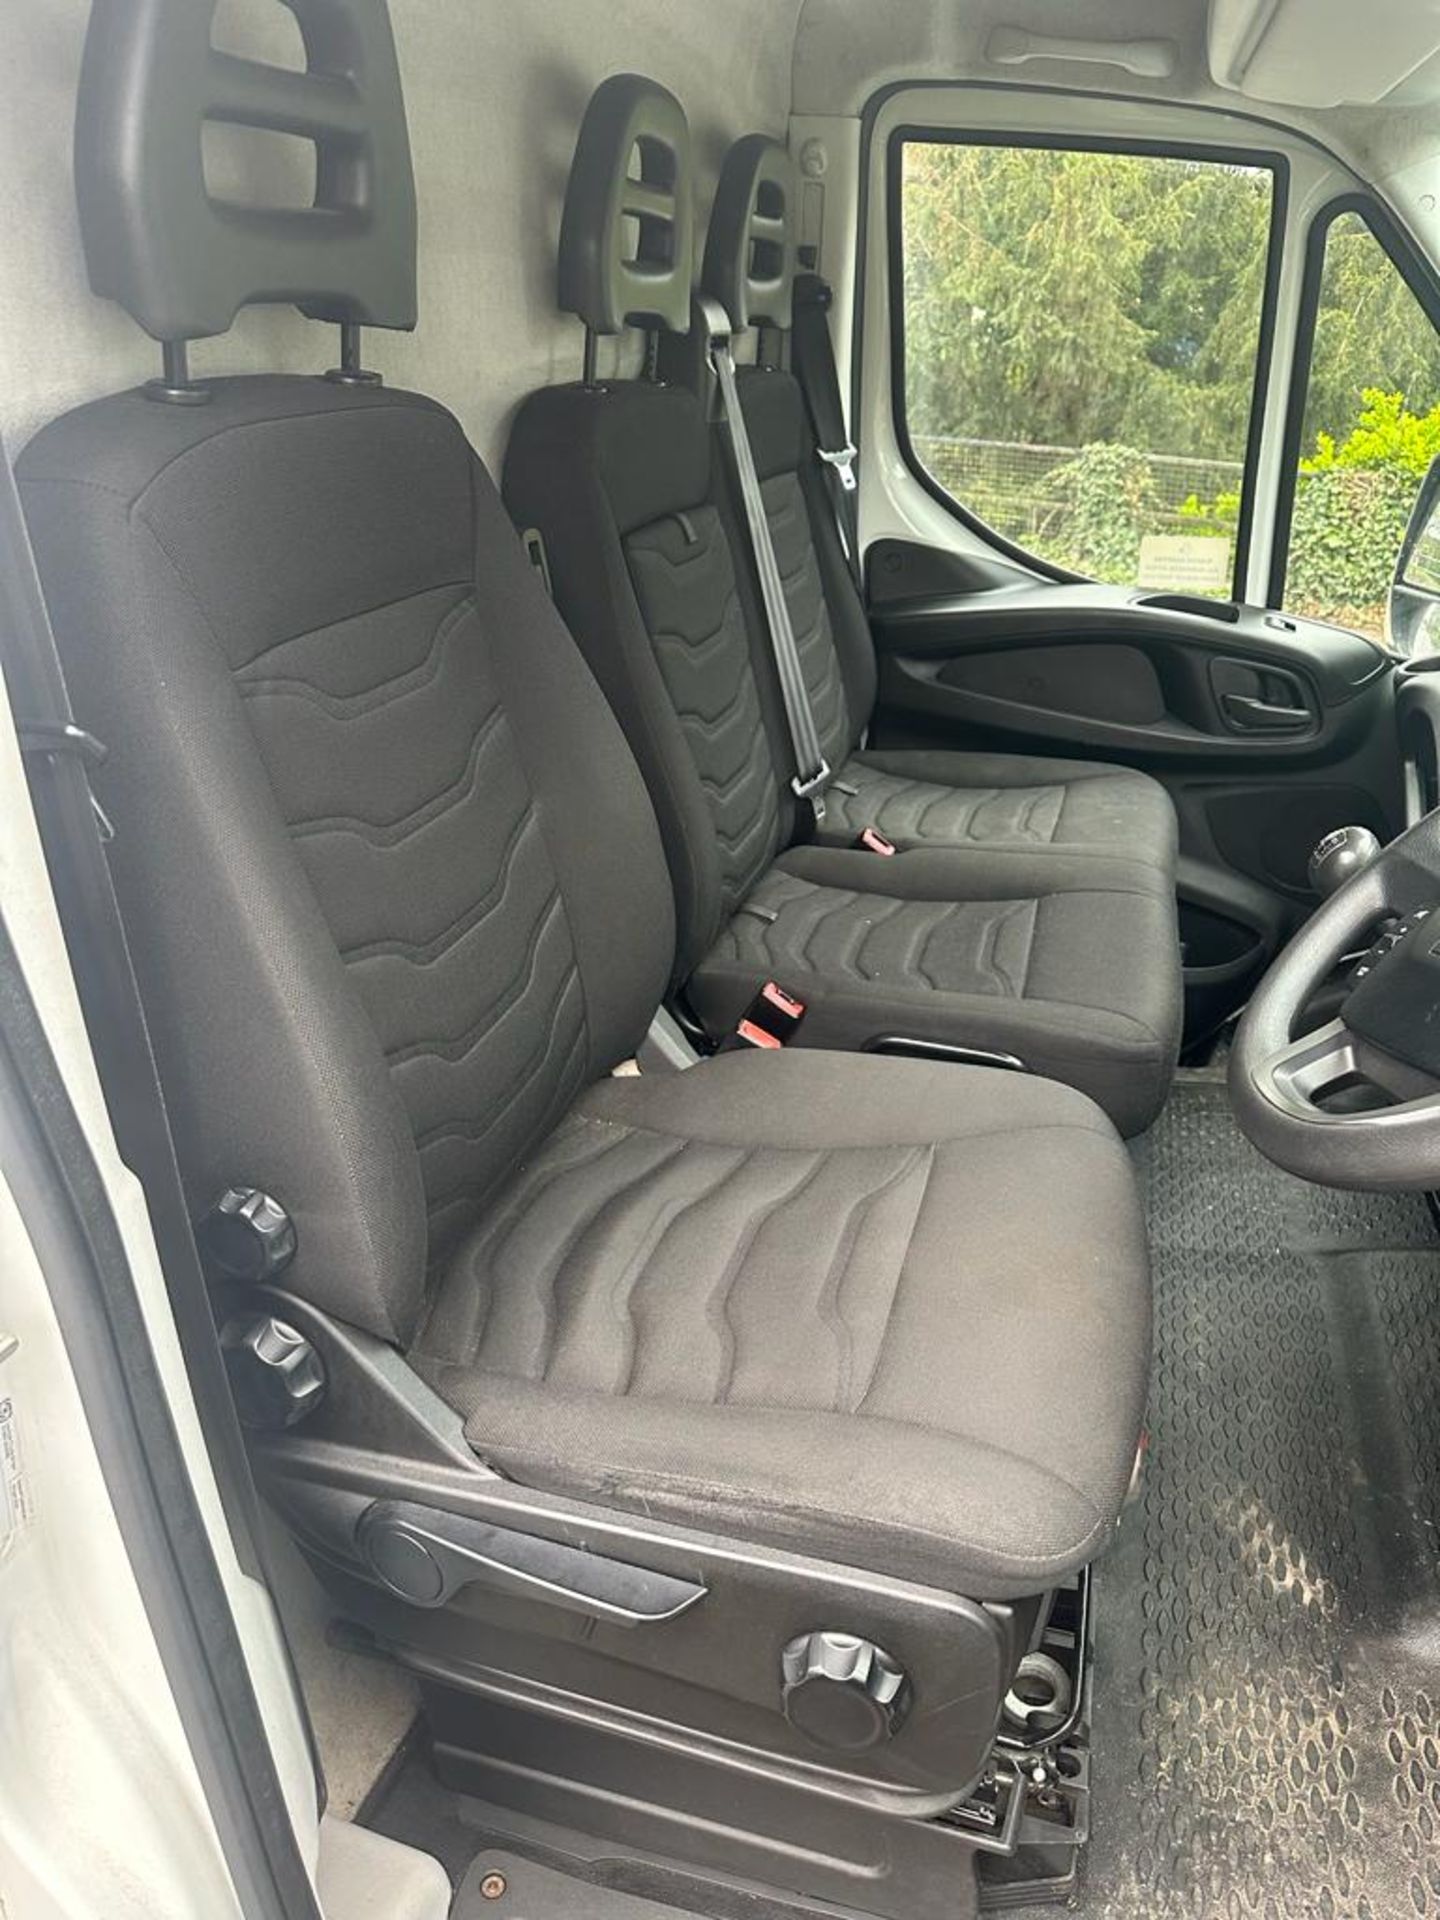 2015 15 REG FORD IVECO DAILY 35C17 VAN  - Image 10 of 15